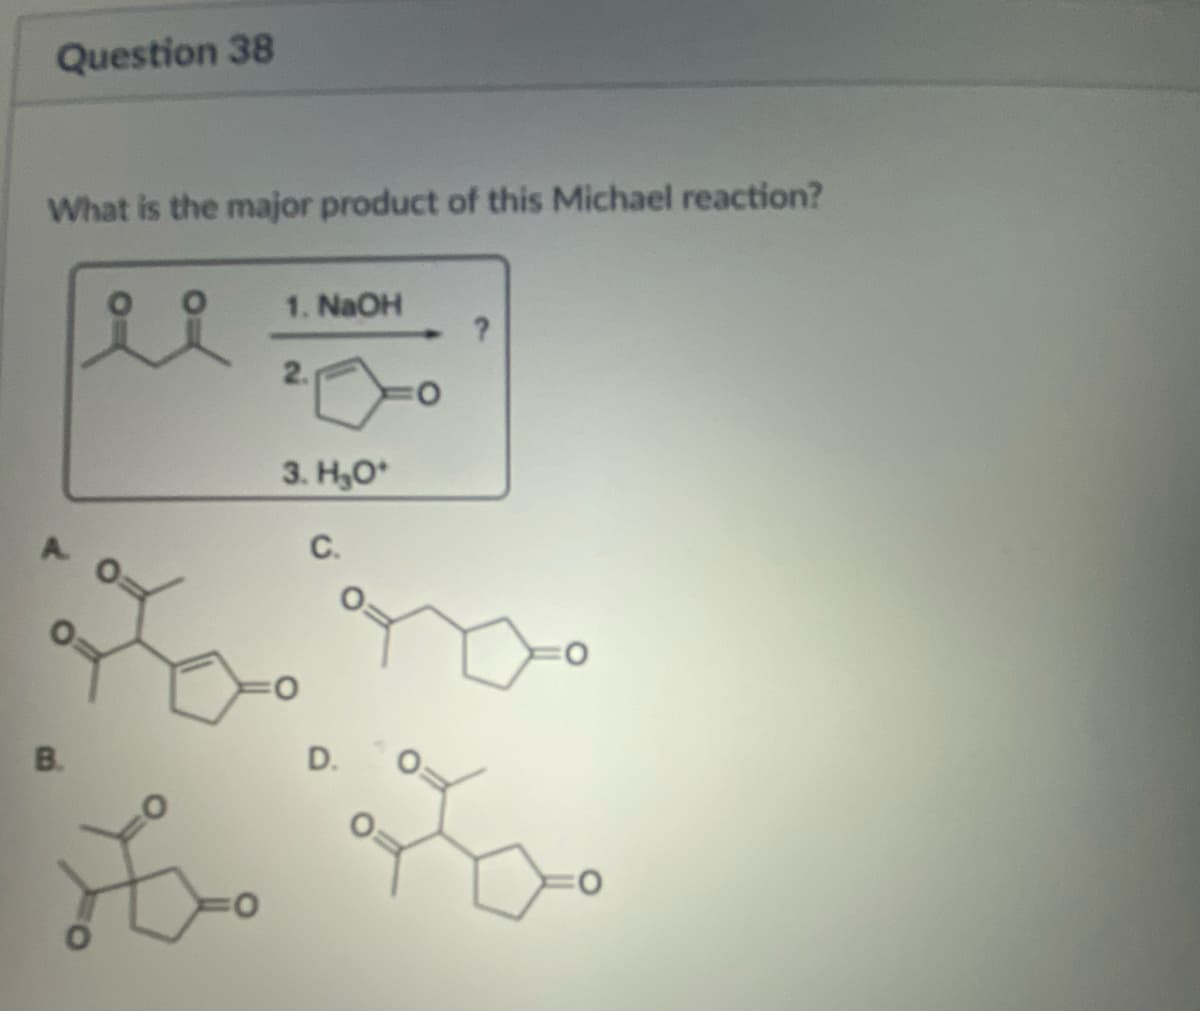 Question 38
What is the major product of this Michael reaction?
B.
Z
1. NaOH
2.
3. H₂O*
C.
D.
?